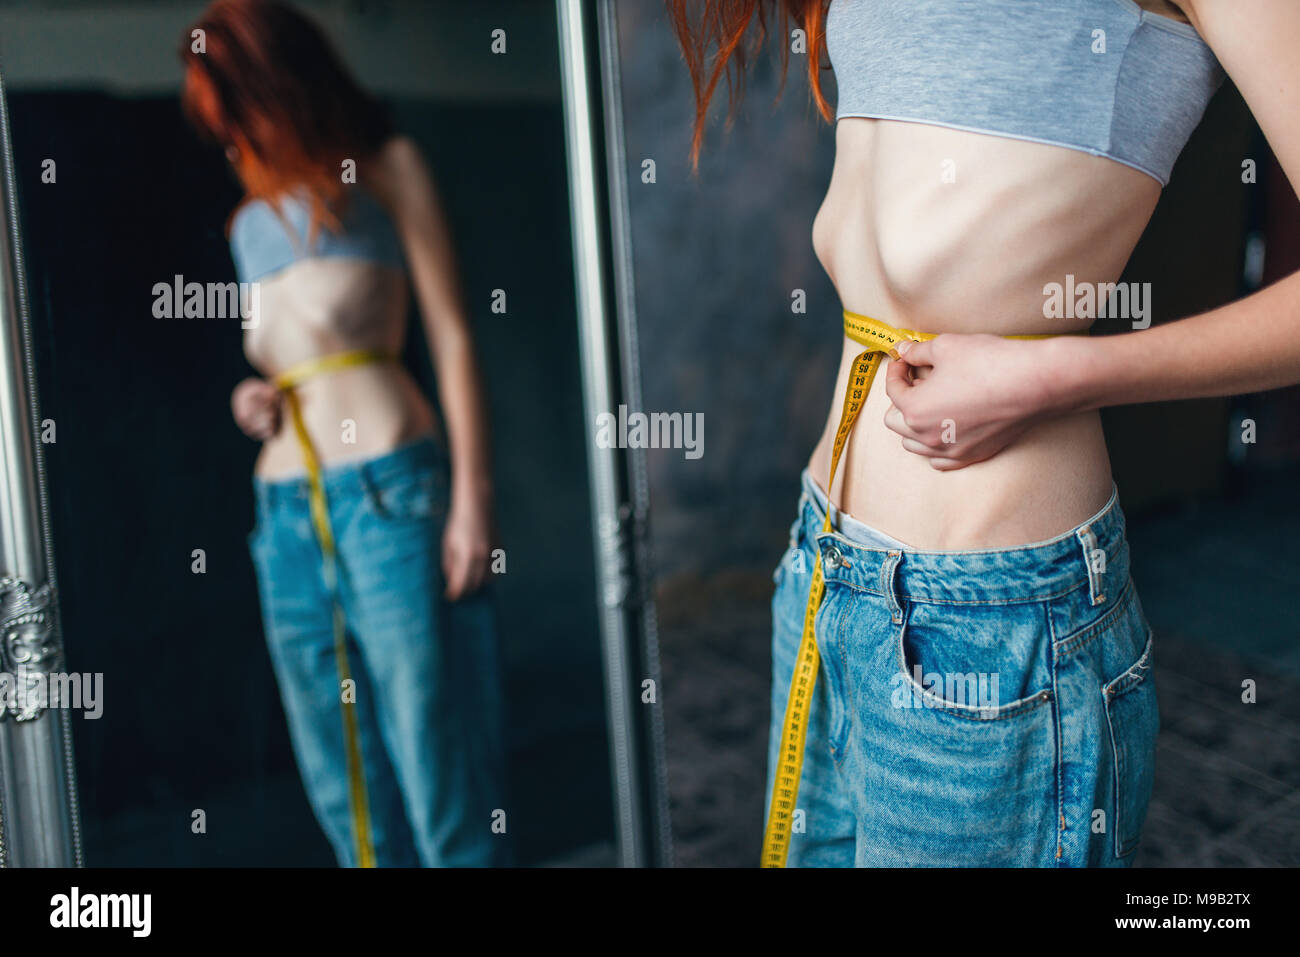 Woman measures waist against mirror, weight loss Stock Photo